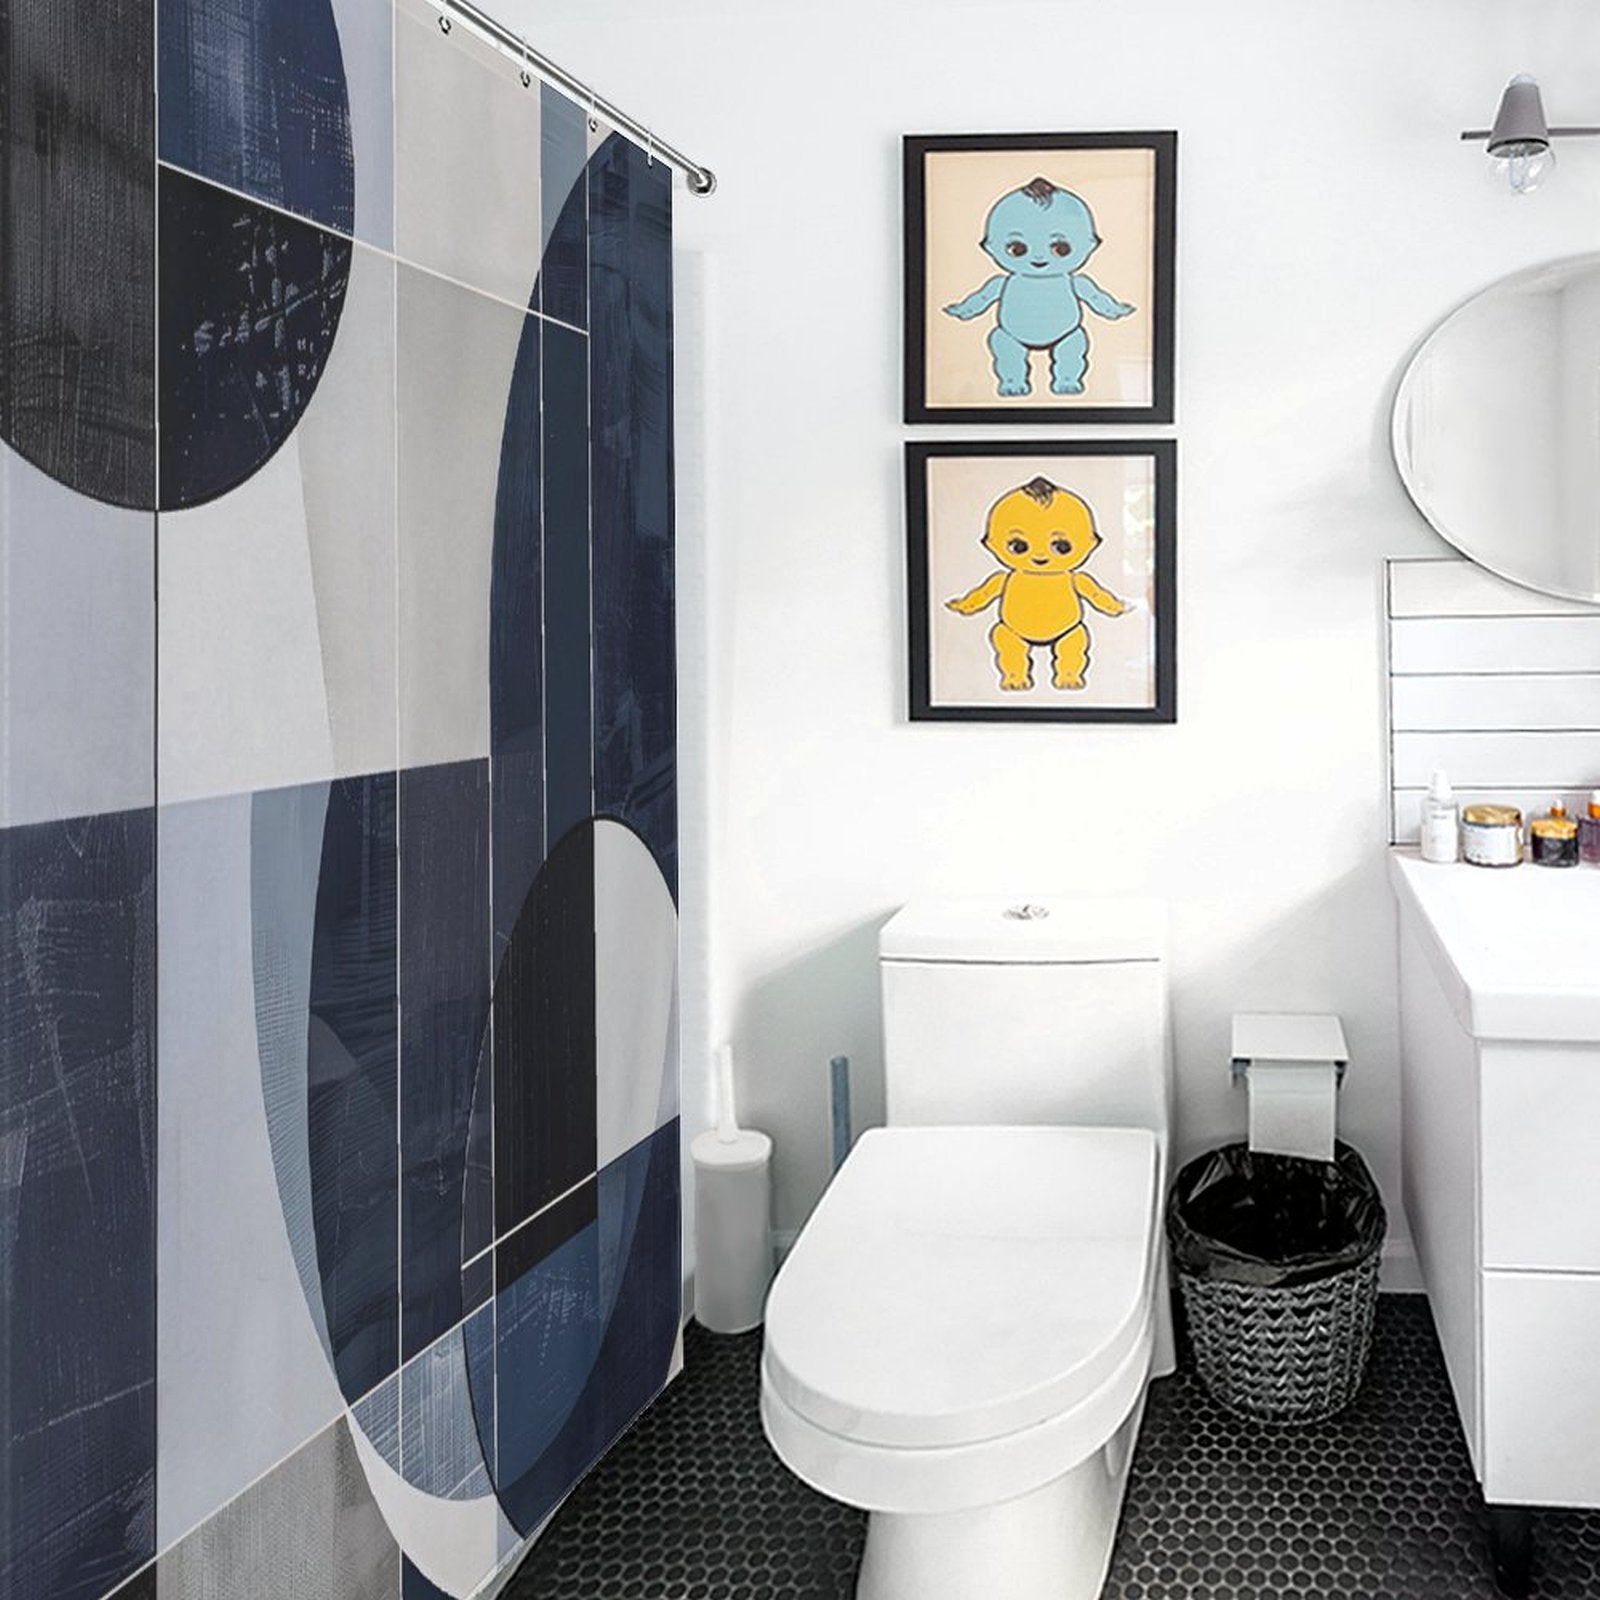 Modern bathroom with a Cotton Cat Geometric Deep Blue Abstract Art Mid-Century Modern Style Shower Curtain in blue and white, a white toilet, and sink. Two framed cartoon prints on the wall complement the round mirror above the sink. Geometric abstract art is subtly showcased in the black hexagonal floor tiles.